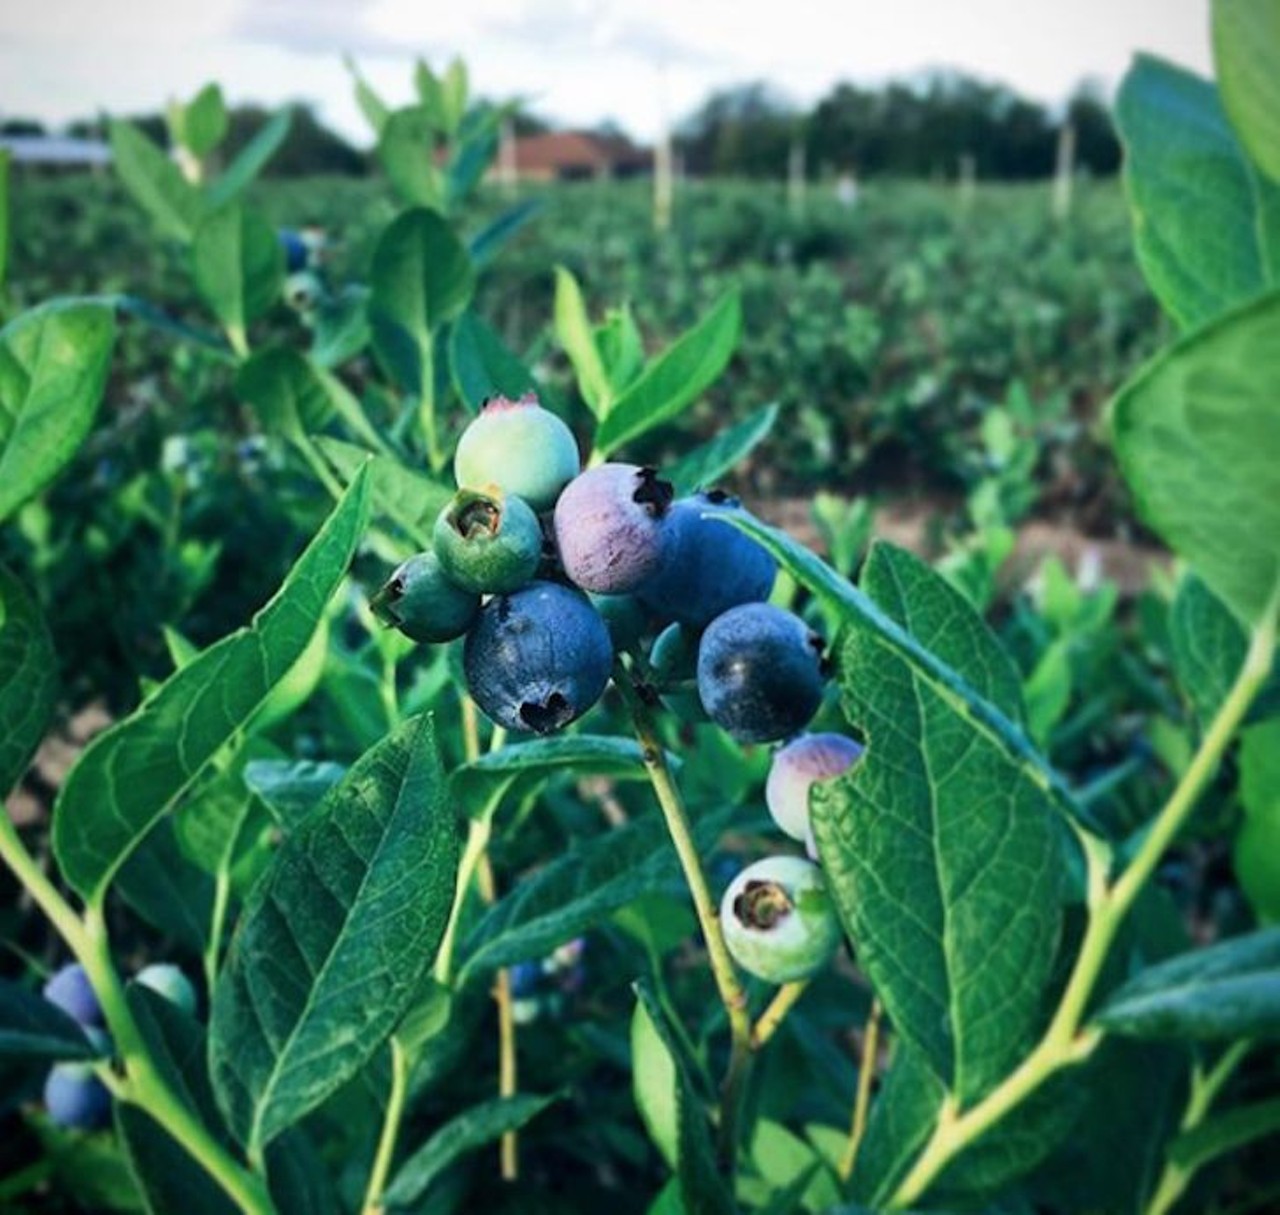 Meadors Blueberry Farm
3685 Orlando Ave., Mims, 407-383-6639
You&#146;ll want to come early and call ahead. This blueberry farm is opened at 8 a.m. and may close early depending on how many ripe berries they have ready to be picked. It&#146;s $3.50 per pound, so you'll want to get to pickin.
Distance from Orlando: 53 minutes
Photo via seeds_of_the_city/Instagram